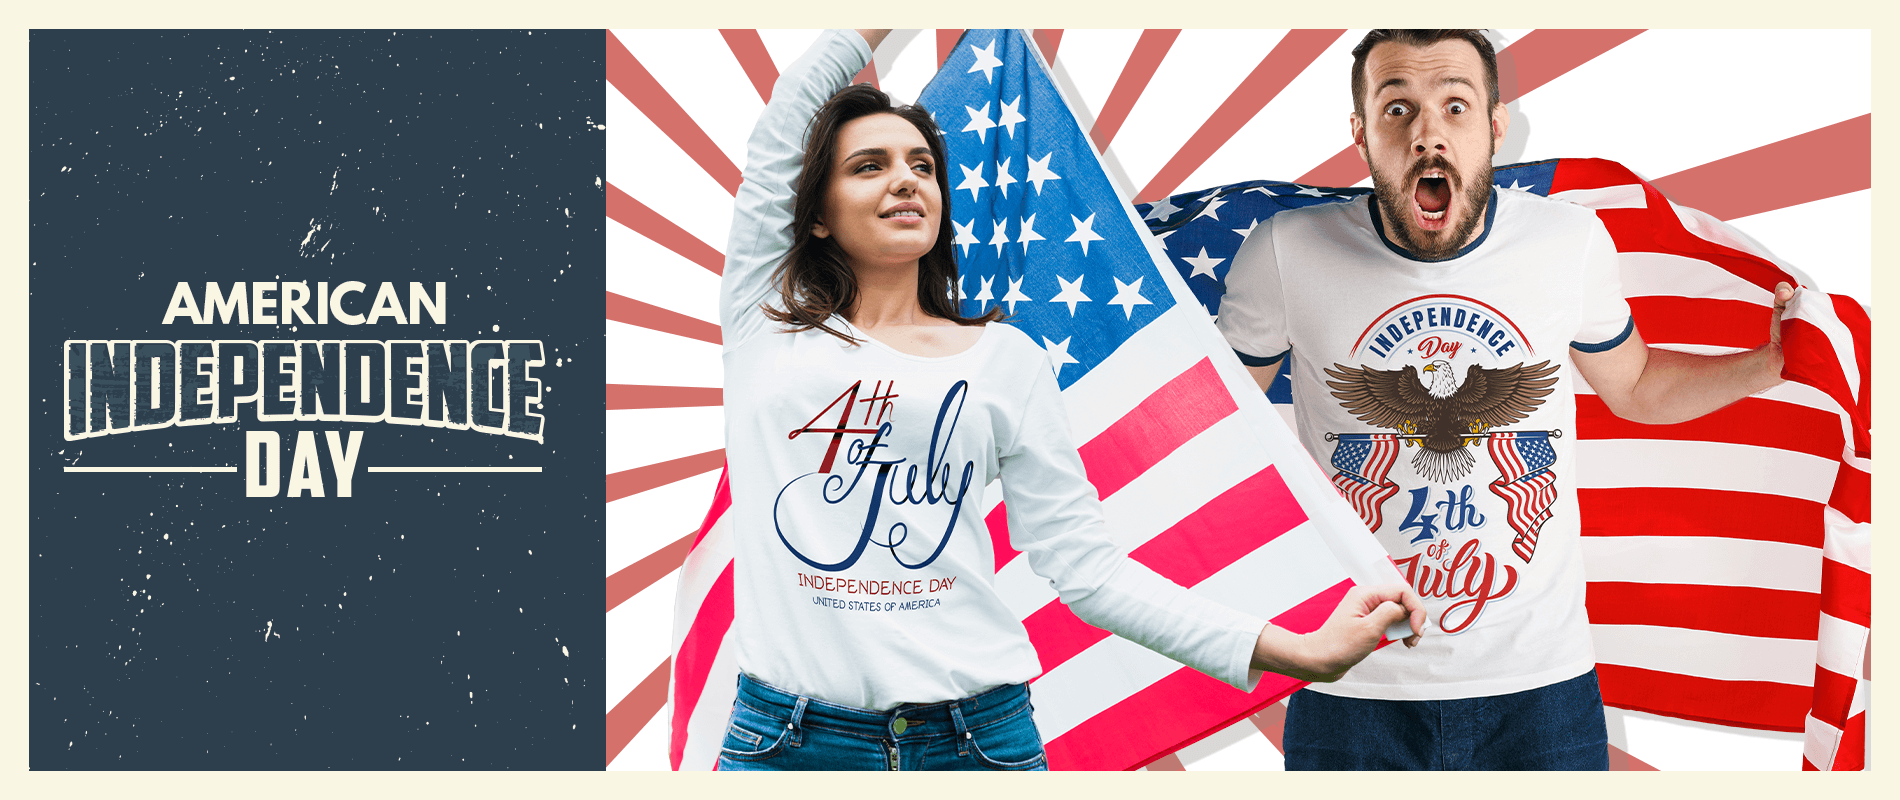 American Independence Day Design Challenge